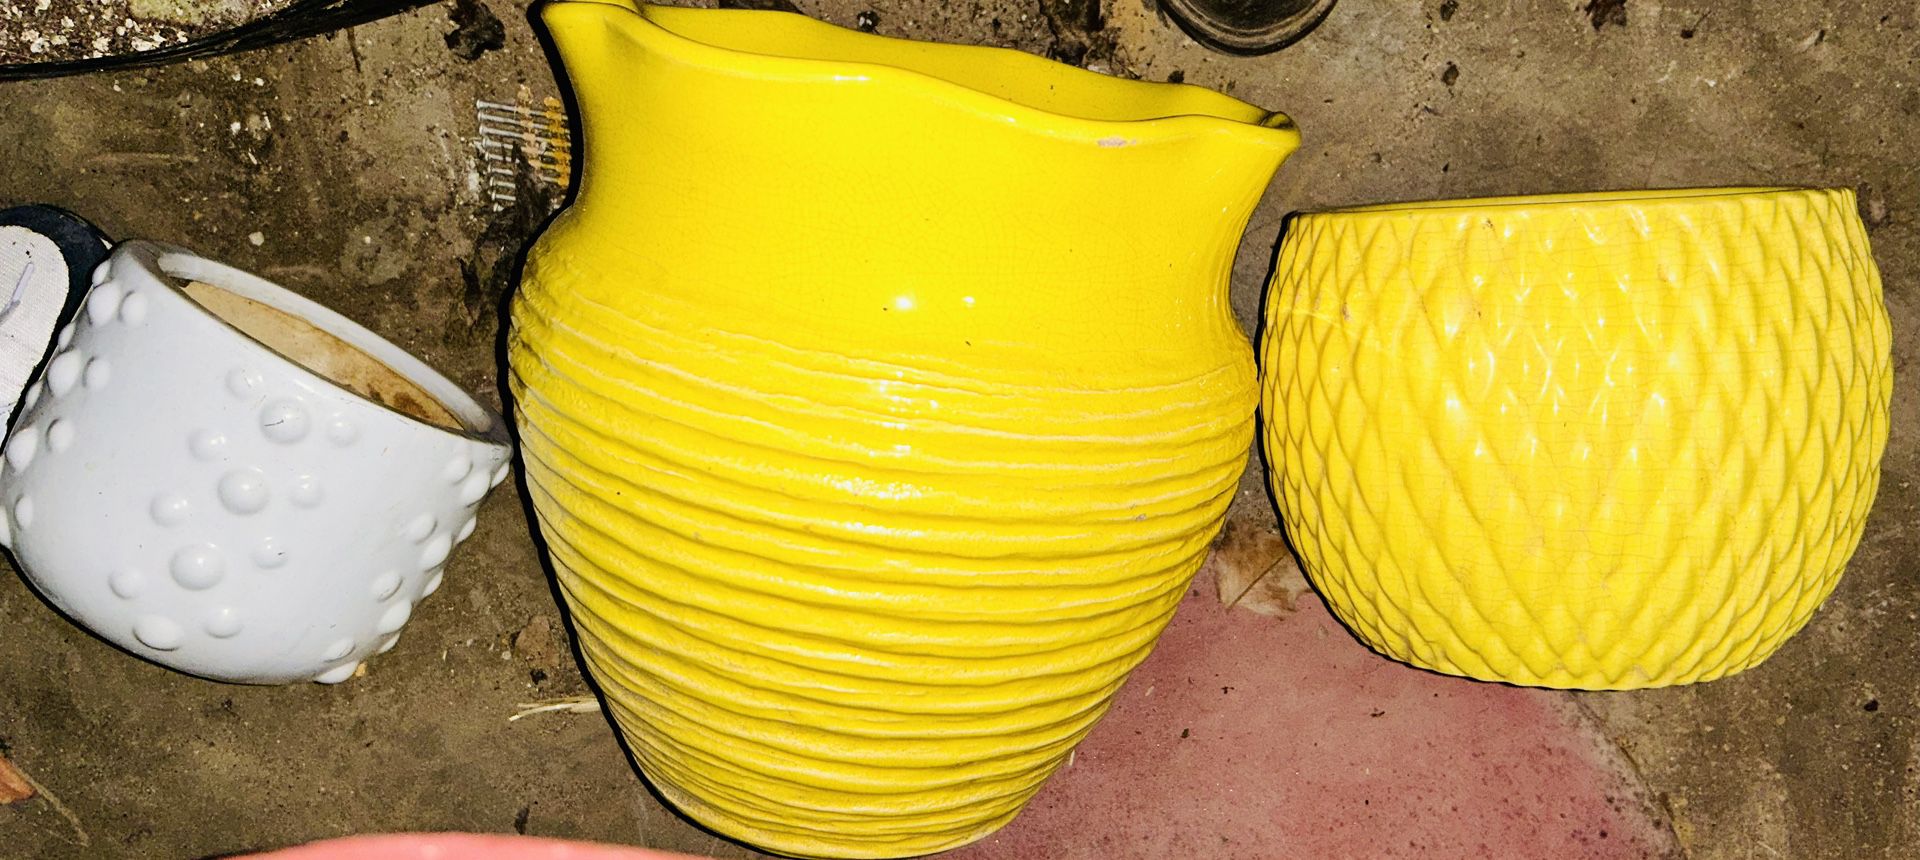 Bright Yellow And White Flower Garden Pots Like New No Damage 